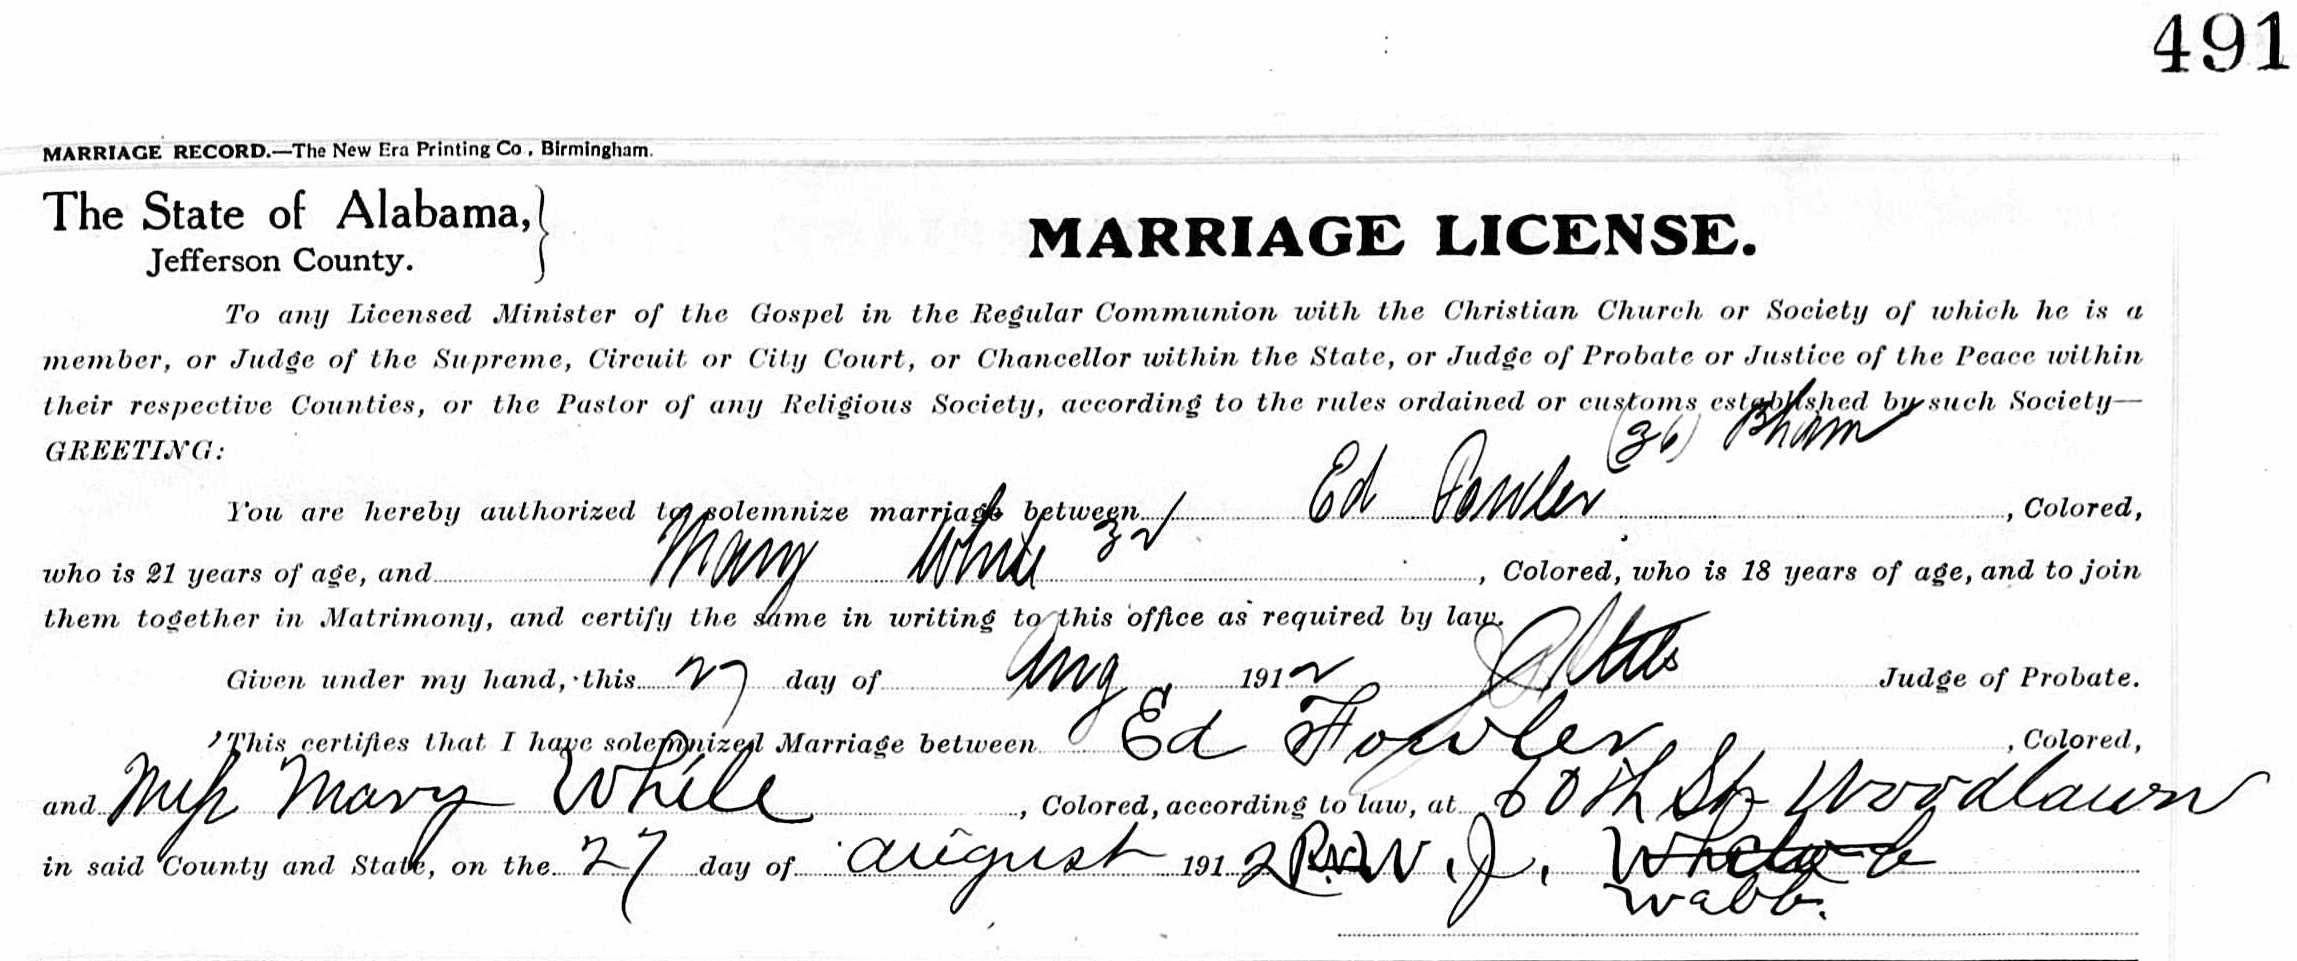 Ed Fowler marries Mary White Aug 27, 1912